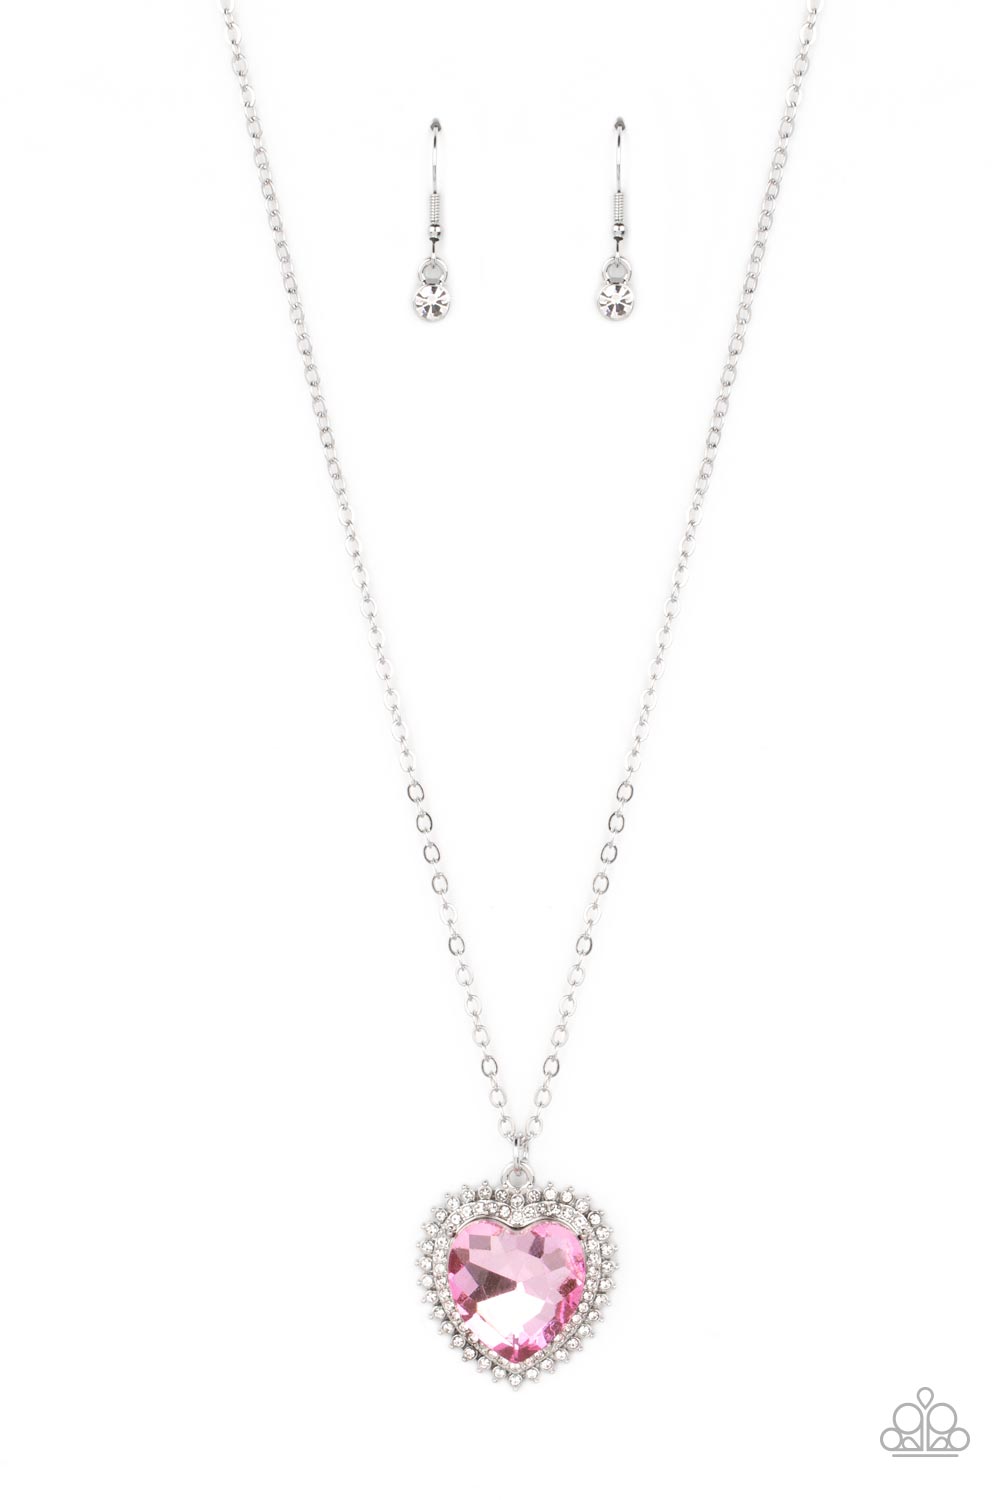 Sweethearts Stroll Pink Necklace - Paparazzi Accessories  A pink crystal-like heart gem sparkles dramatically as it's wrapped in a glassy white rhinestone-studded heart frame. Adding additional shimmer, a second layer of white rhinestones encircles the studded pendant as it swings from a classic silver chain in a flirty finish. Features an adjustable clasp closure.  Sold as one individual necklace. Includes one pair of matching earrings.